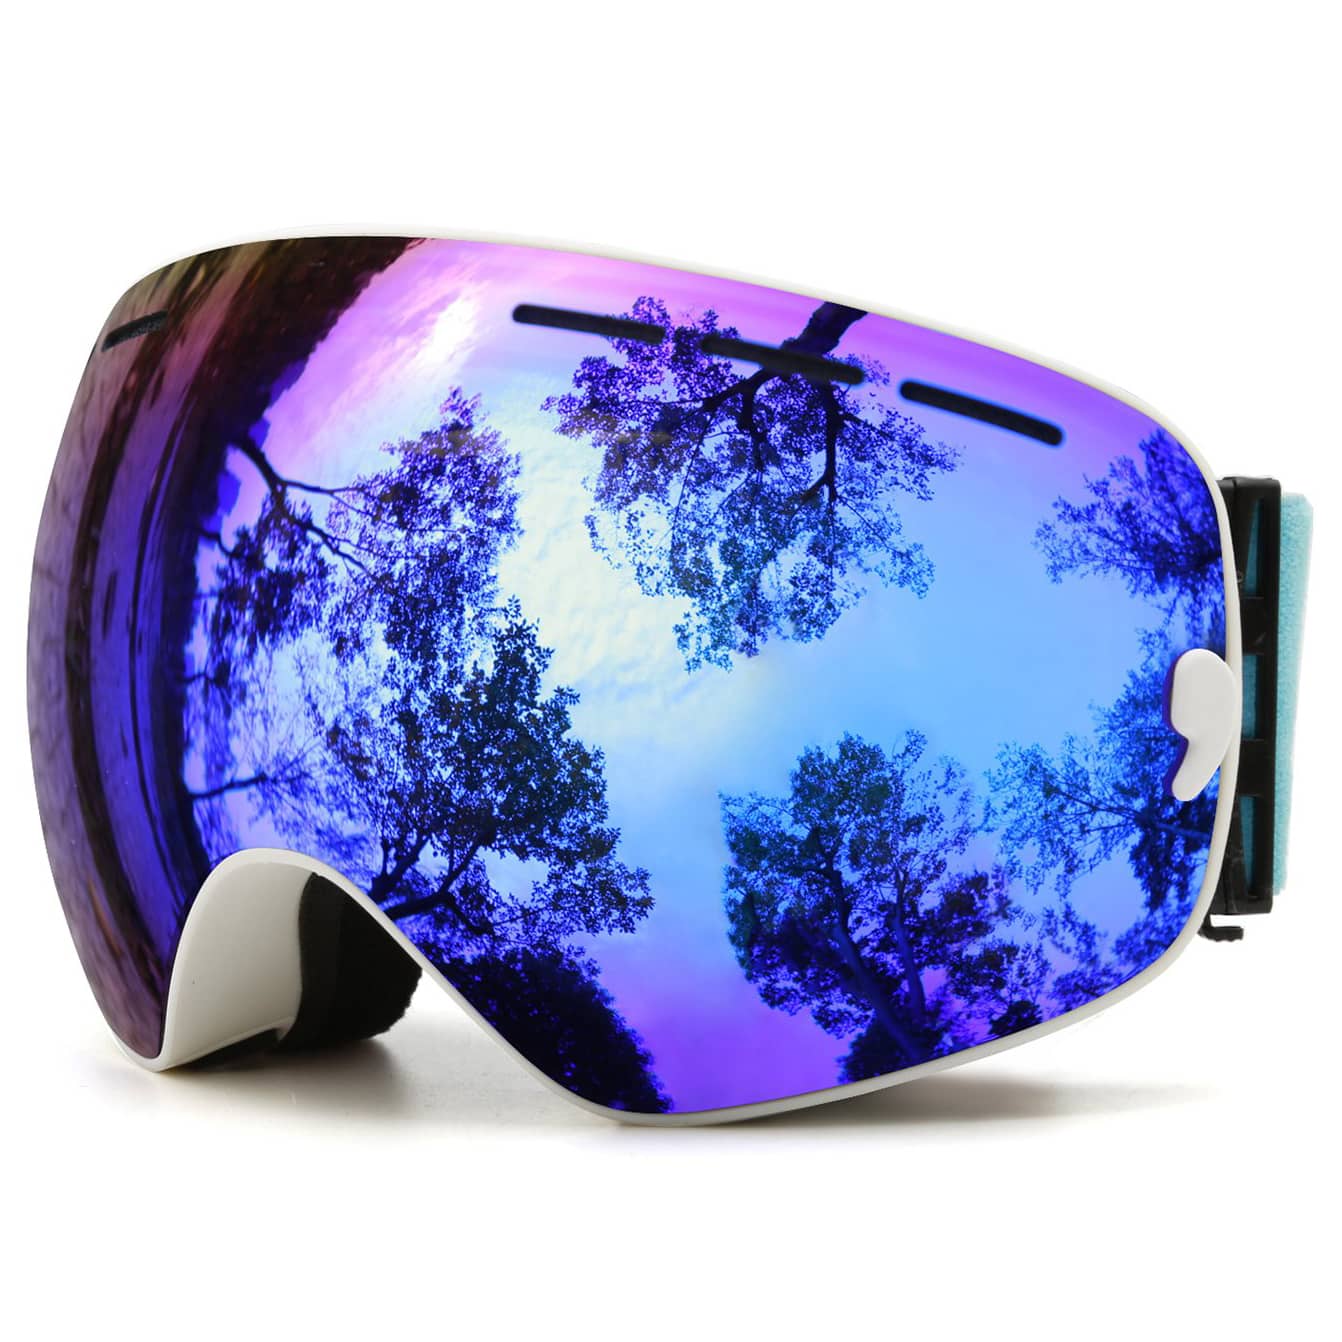 Top 10 Best Snowboard Goggles in 2023 Reviews | Buyer's Guide